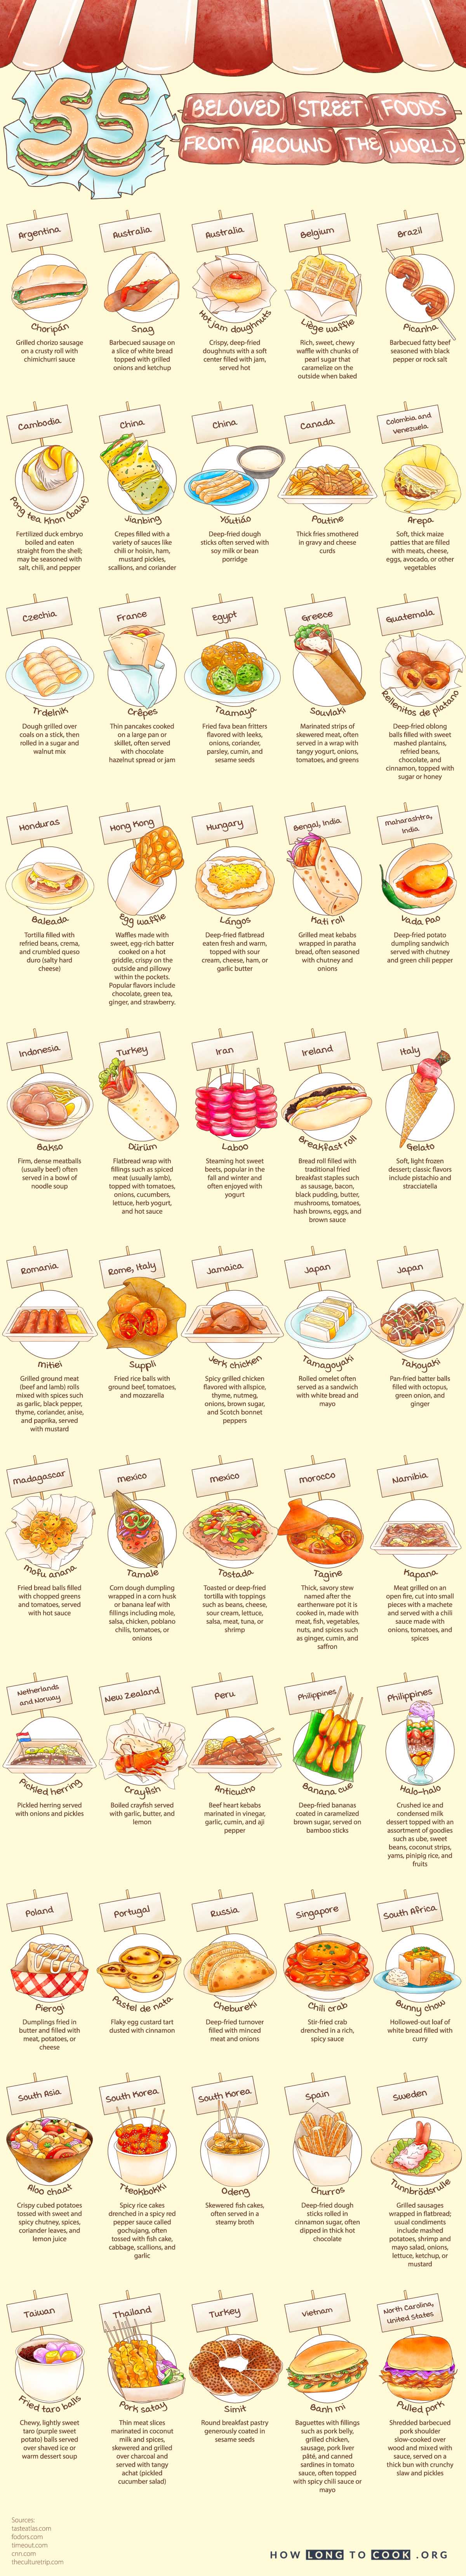 55 Street Foods From Around the World